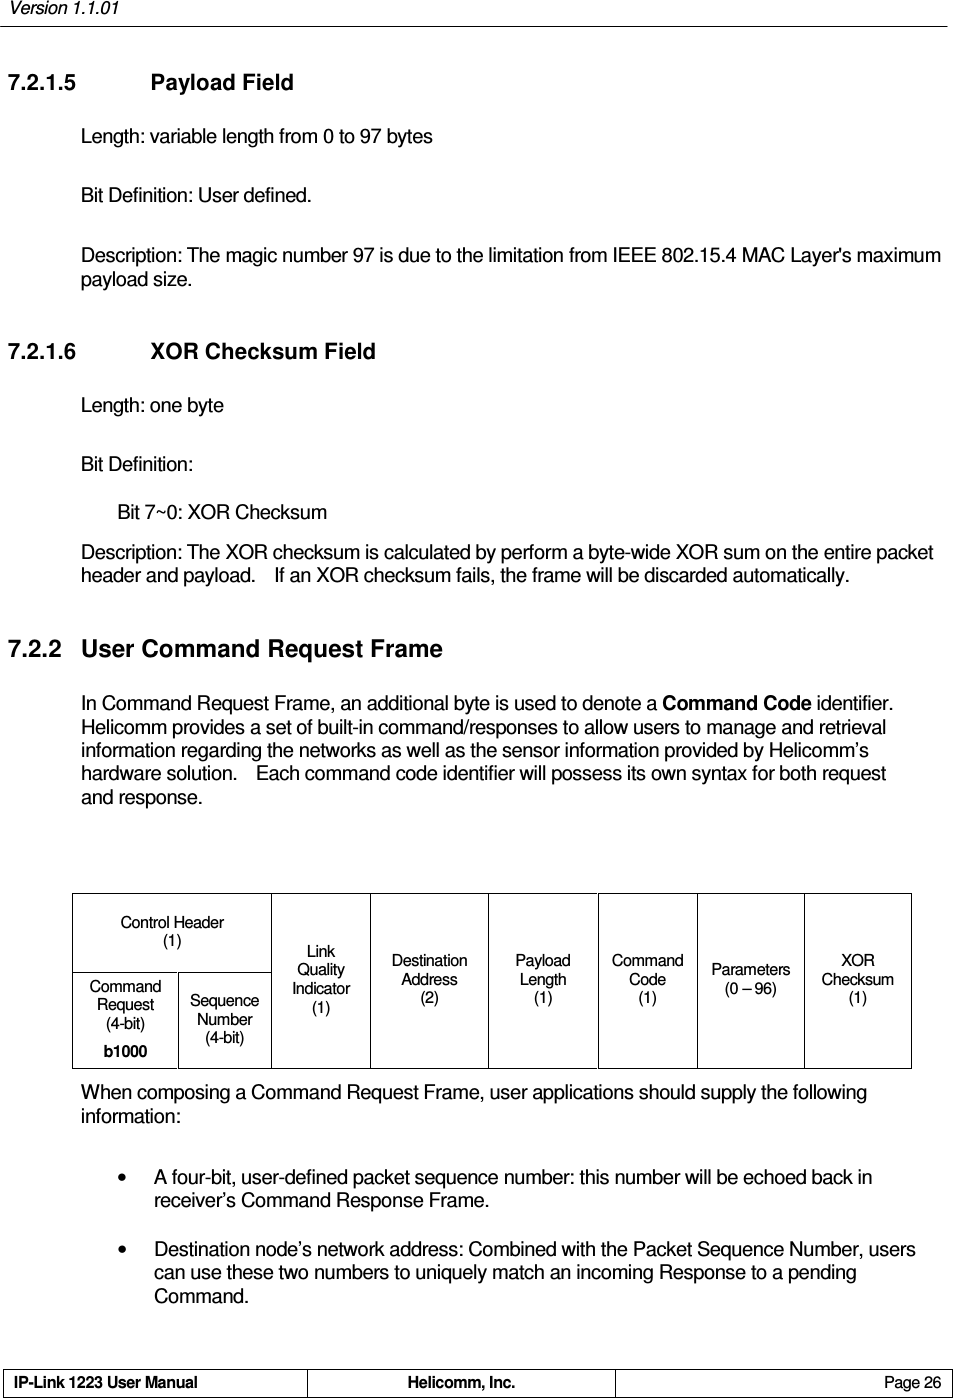 Version 1.1.01     IP-Link 1223 User Manual  Helicomm, Inc.  Page 26   7.2.1.5    Payload Field Length: variable length from 0 to 97 bytes Bit Definition: User defined. Description: The magic number 97 is due to the limitation from IEEE 802.15.4 MAC Layer&apos;s maximum payload size. 7.2.1.6    XOR Checksum Field Length: one byte  Bit Definition: Bit 7~0: XOR Checksum Description: The XOR checksum is calculated by perform a byte-wide XOR sum on the entire packet header and payload.    If an XOR checksum fails, the frame will be discarded automatically. 7.2.2  User Command Request Frame In Command Request Frame, an additional byte is used to denote a Command Code identifier.   Helicomm provides a set of built-in command/responses to allow users to manage and retrieval information regarding the networks as well as the sensor information provided by Helicomm’s hardware solution.    Each command code identifier will possess its own syntax for both request and response.  Control Header (1) Command Request  (4-bit) b1000 Sequence Number  (4-bit) Link Quality Indicator (1) Destination Address (2) Payload Length   (1) Command Code (1) Parameters (0 – 96) XOR Checksum (1) When composing a Command Request Frame, user applications should supply the following information: •  A four-bit, user-defined packet sequence number: this number will be echoed back in receiver’s Command Response Frame.   •  Destination node’s network address: Combined with the Packet Sequence Number, users can use these two numbers to uniquely match an incoming Response to a pending Command. 